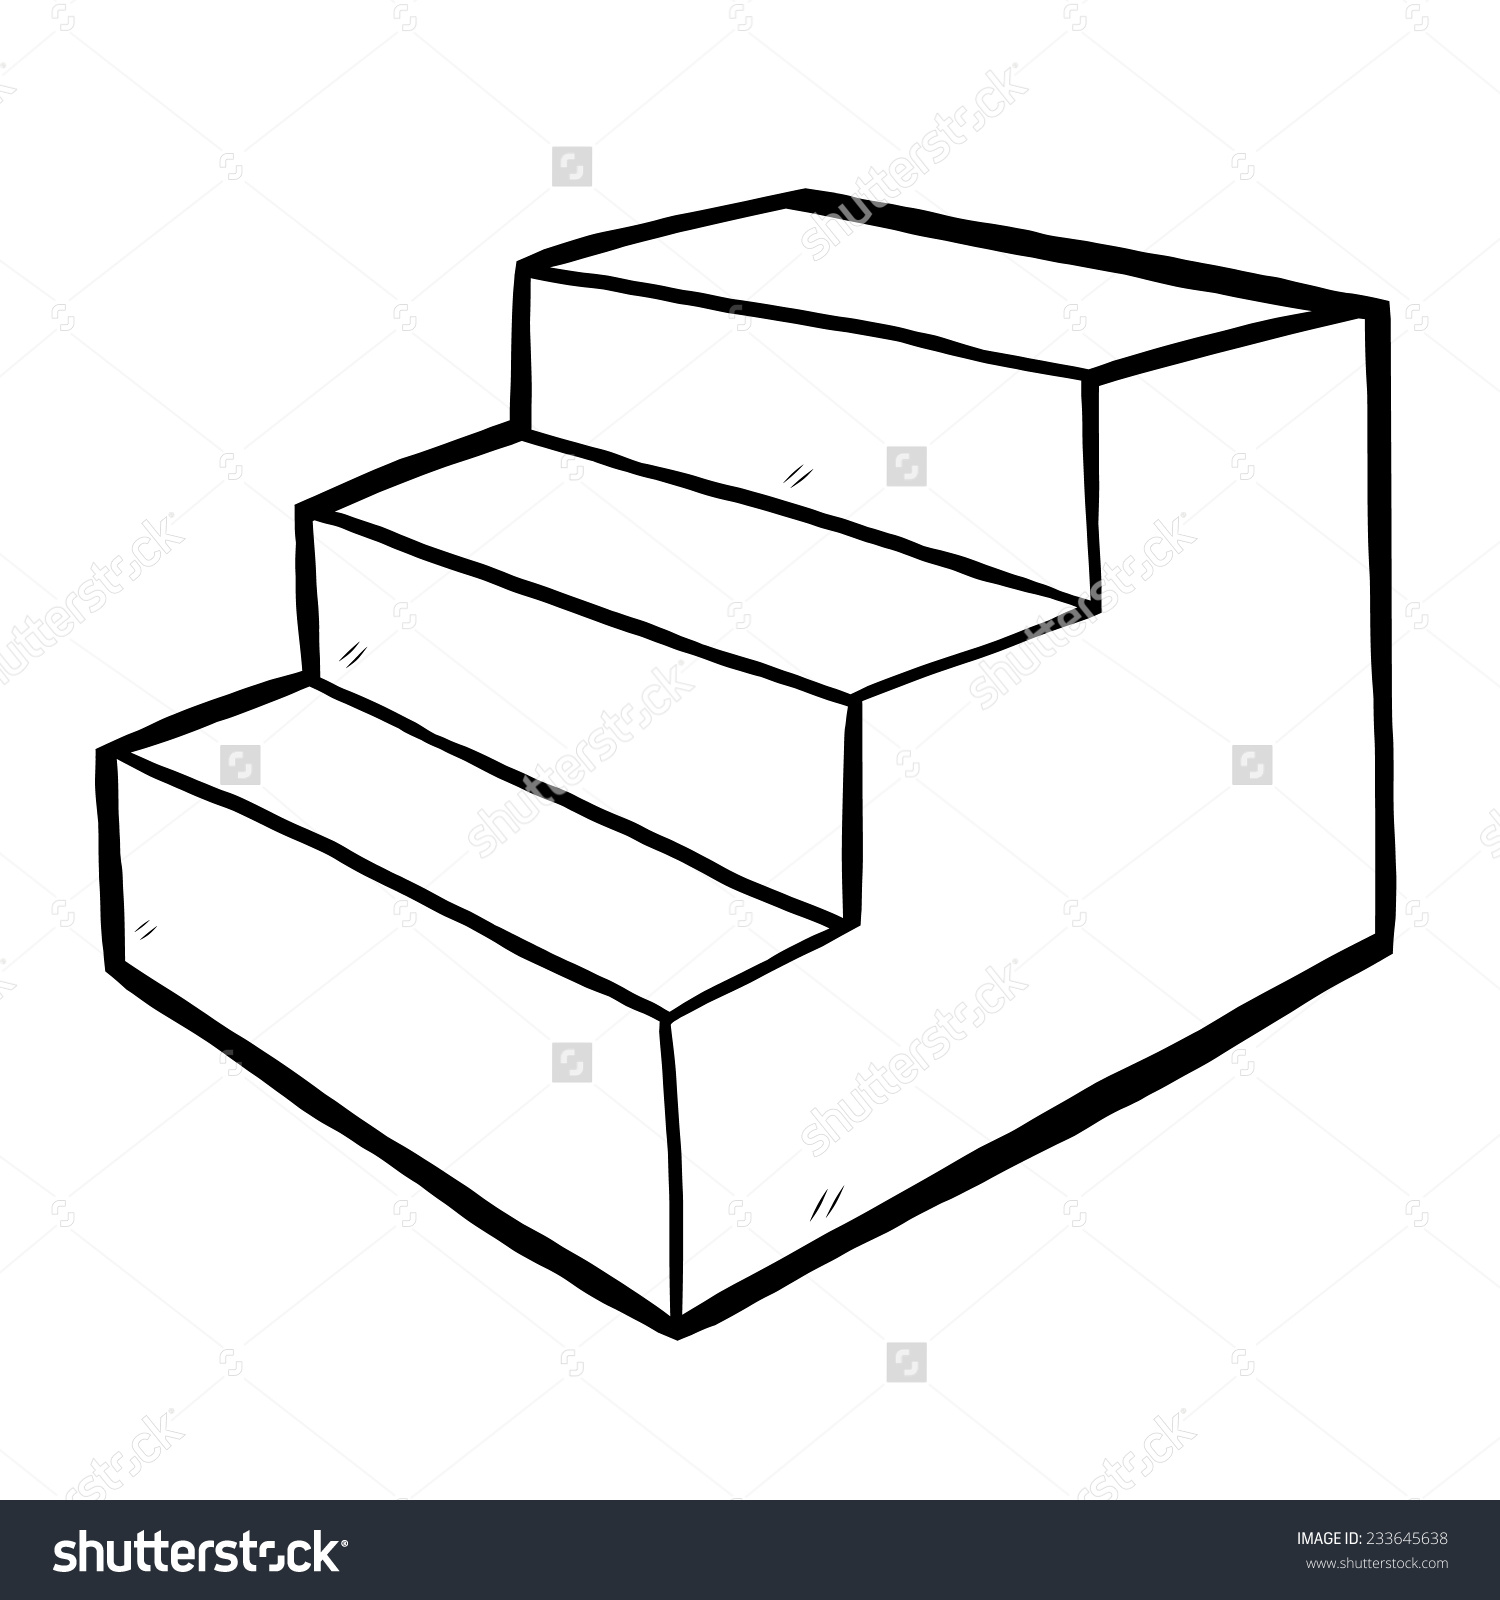 stairs clipart black and white 7